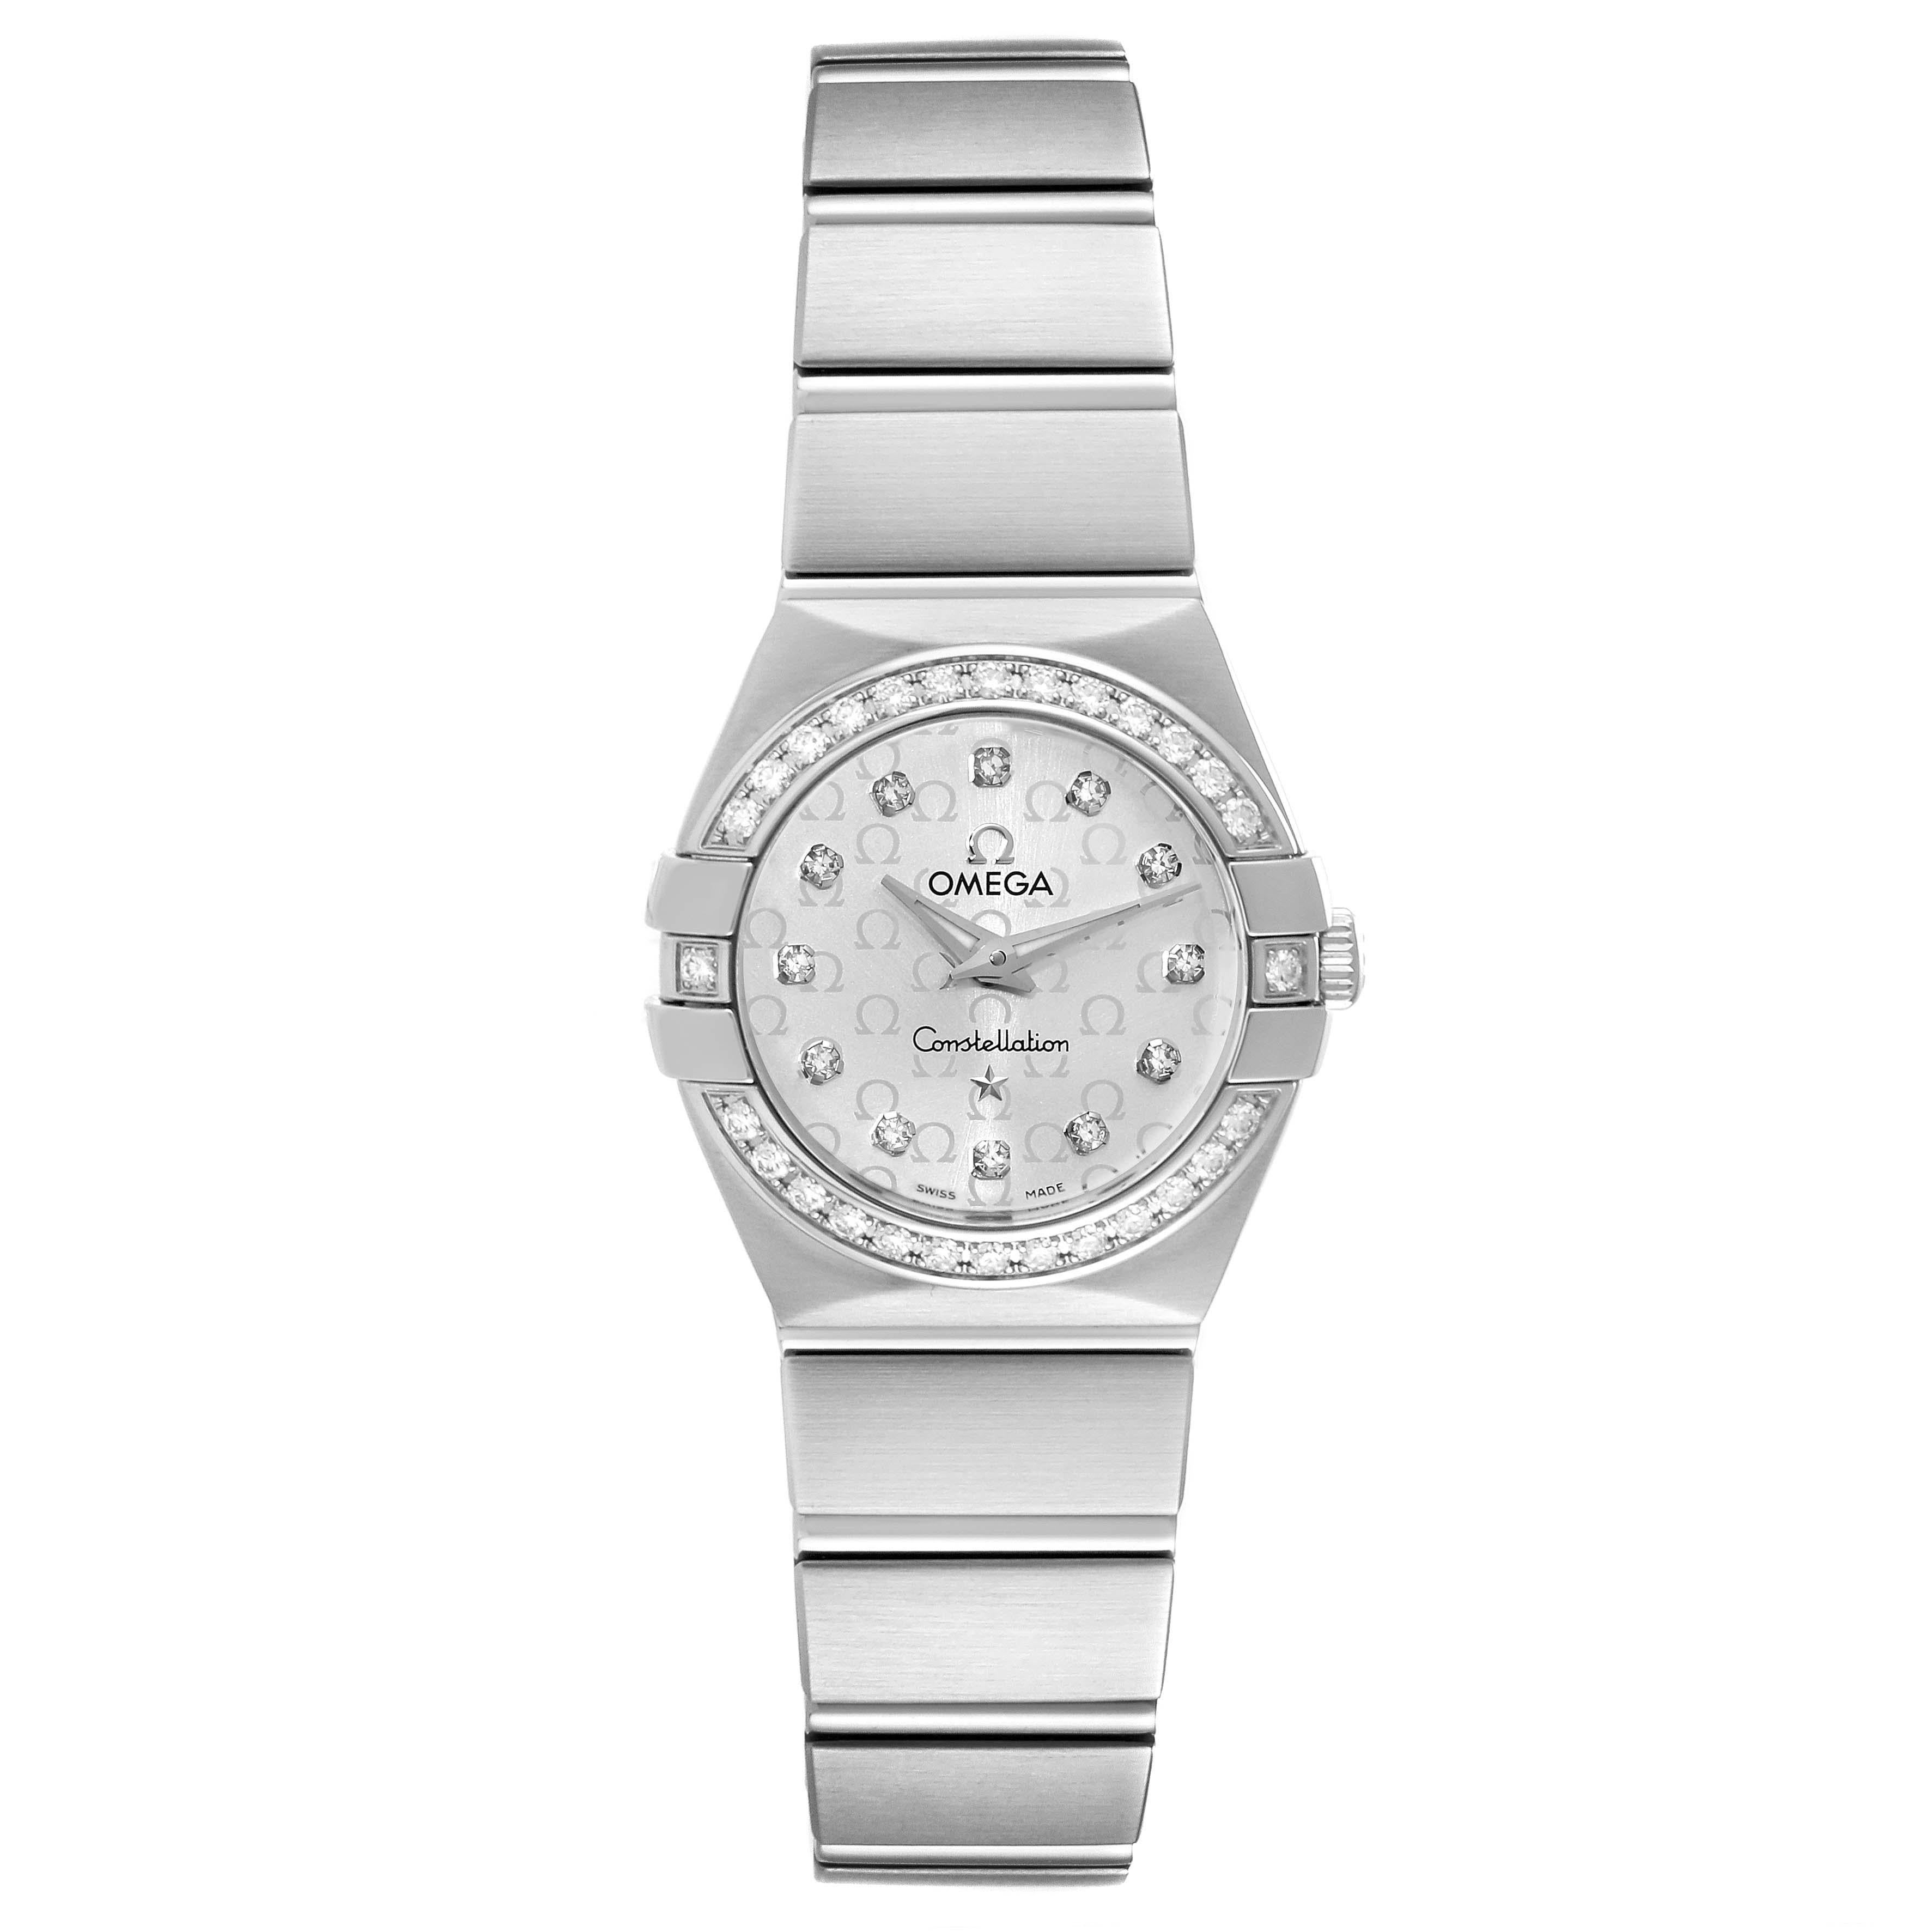 Omega Constellation Diamond Steel Ladies Watch 123.15.24.60.52.001 Box Card. Quartz movement. Stainless steel brushed round case 24mm in diameter. Stainless steel original Omega factory diamond bezel. Scratch resistant sapphire crystal. Silver Omega